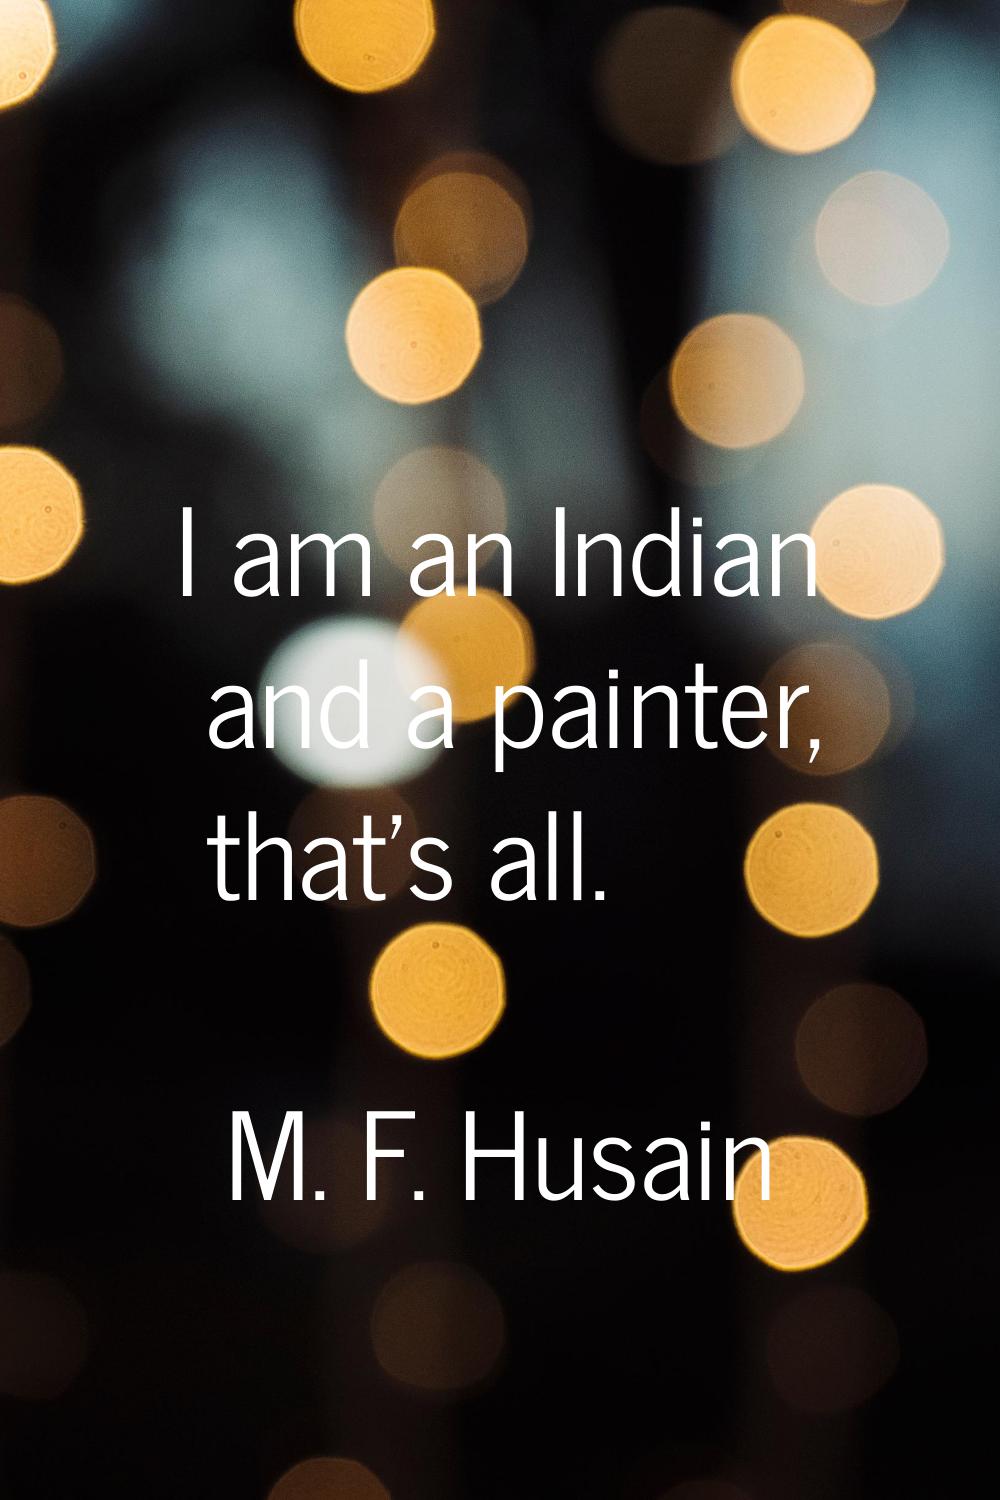 I am an Indian and a painter, that's all.